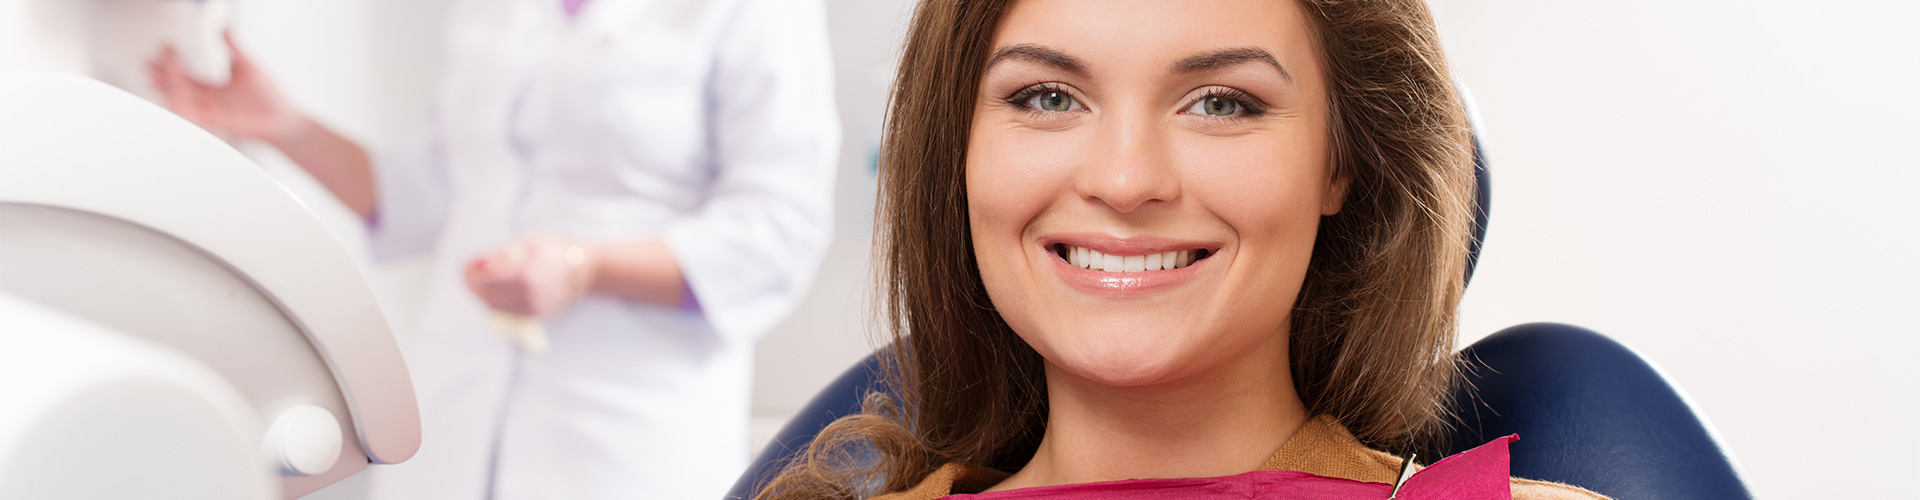 Benefits Of Finding A Holistic Dentist Office Near Hendersonville, Nc